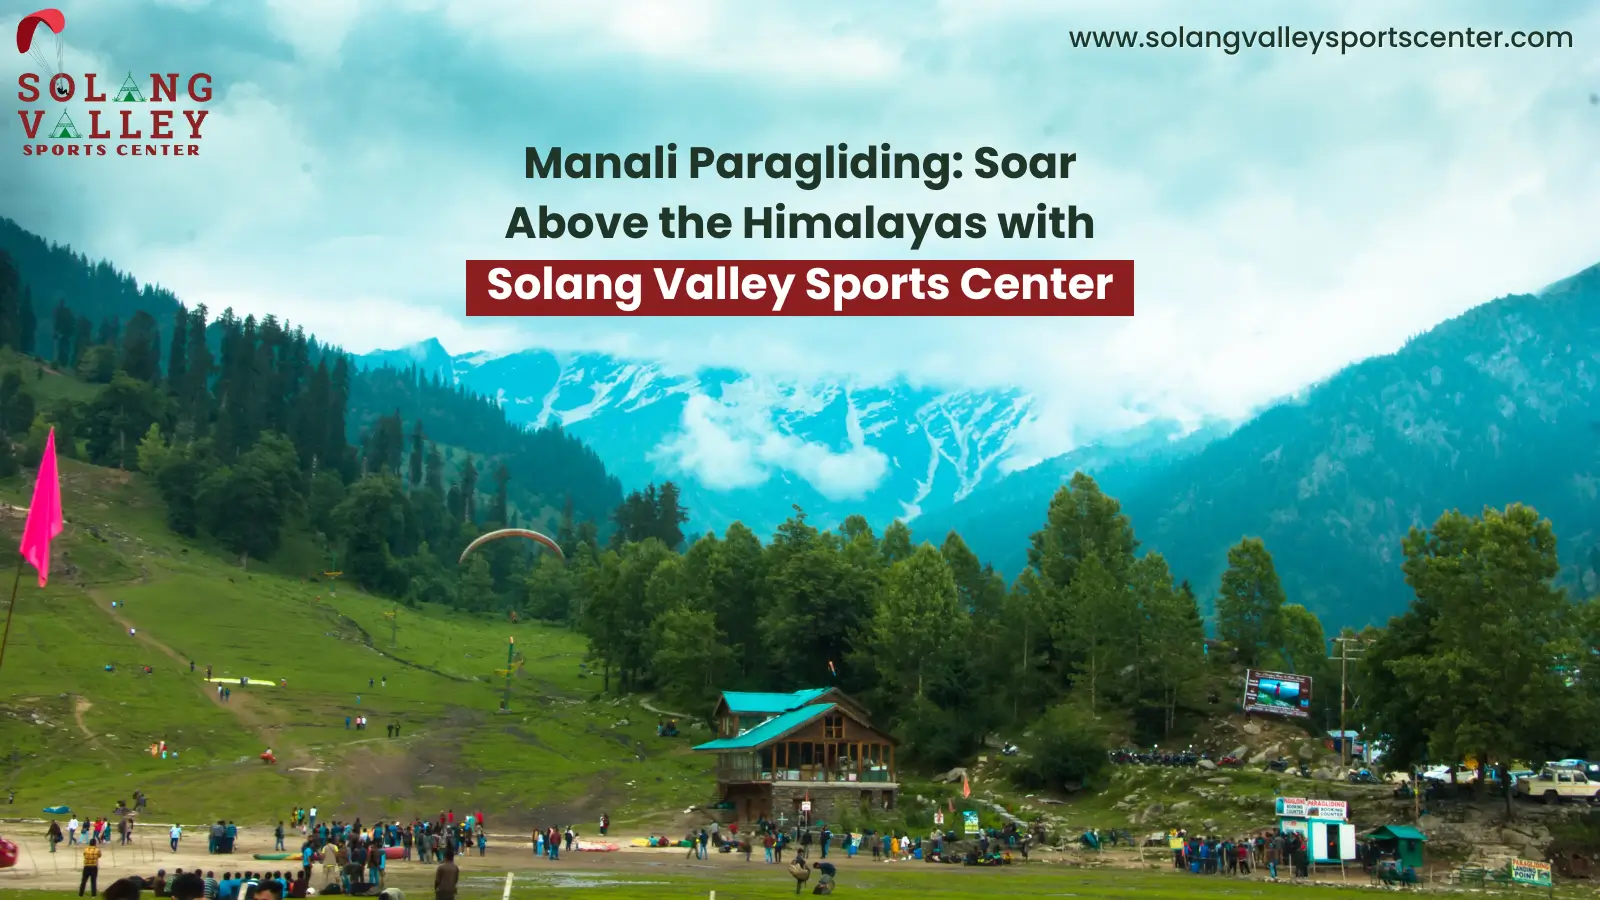 Manali Paragliding: Soar Above the Himalayas with Solang Valley Sports Center